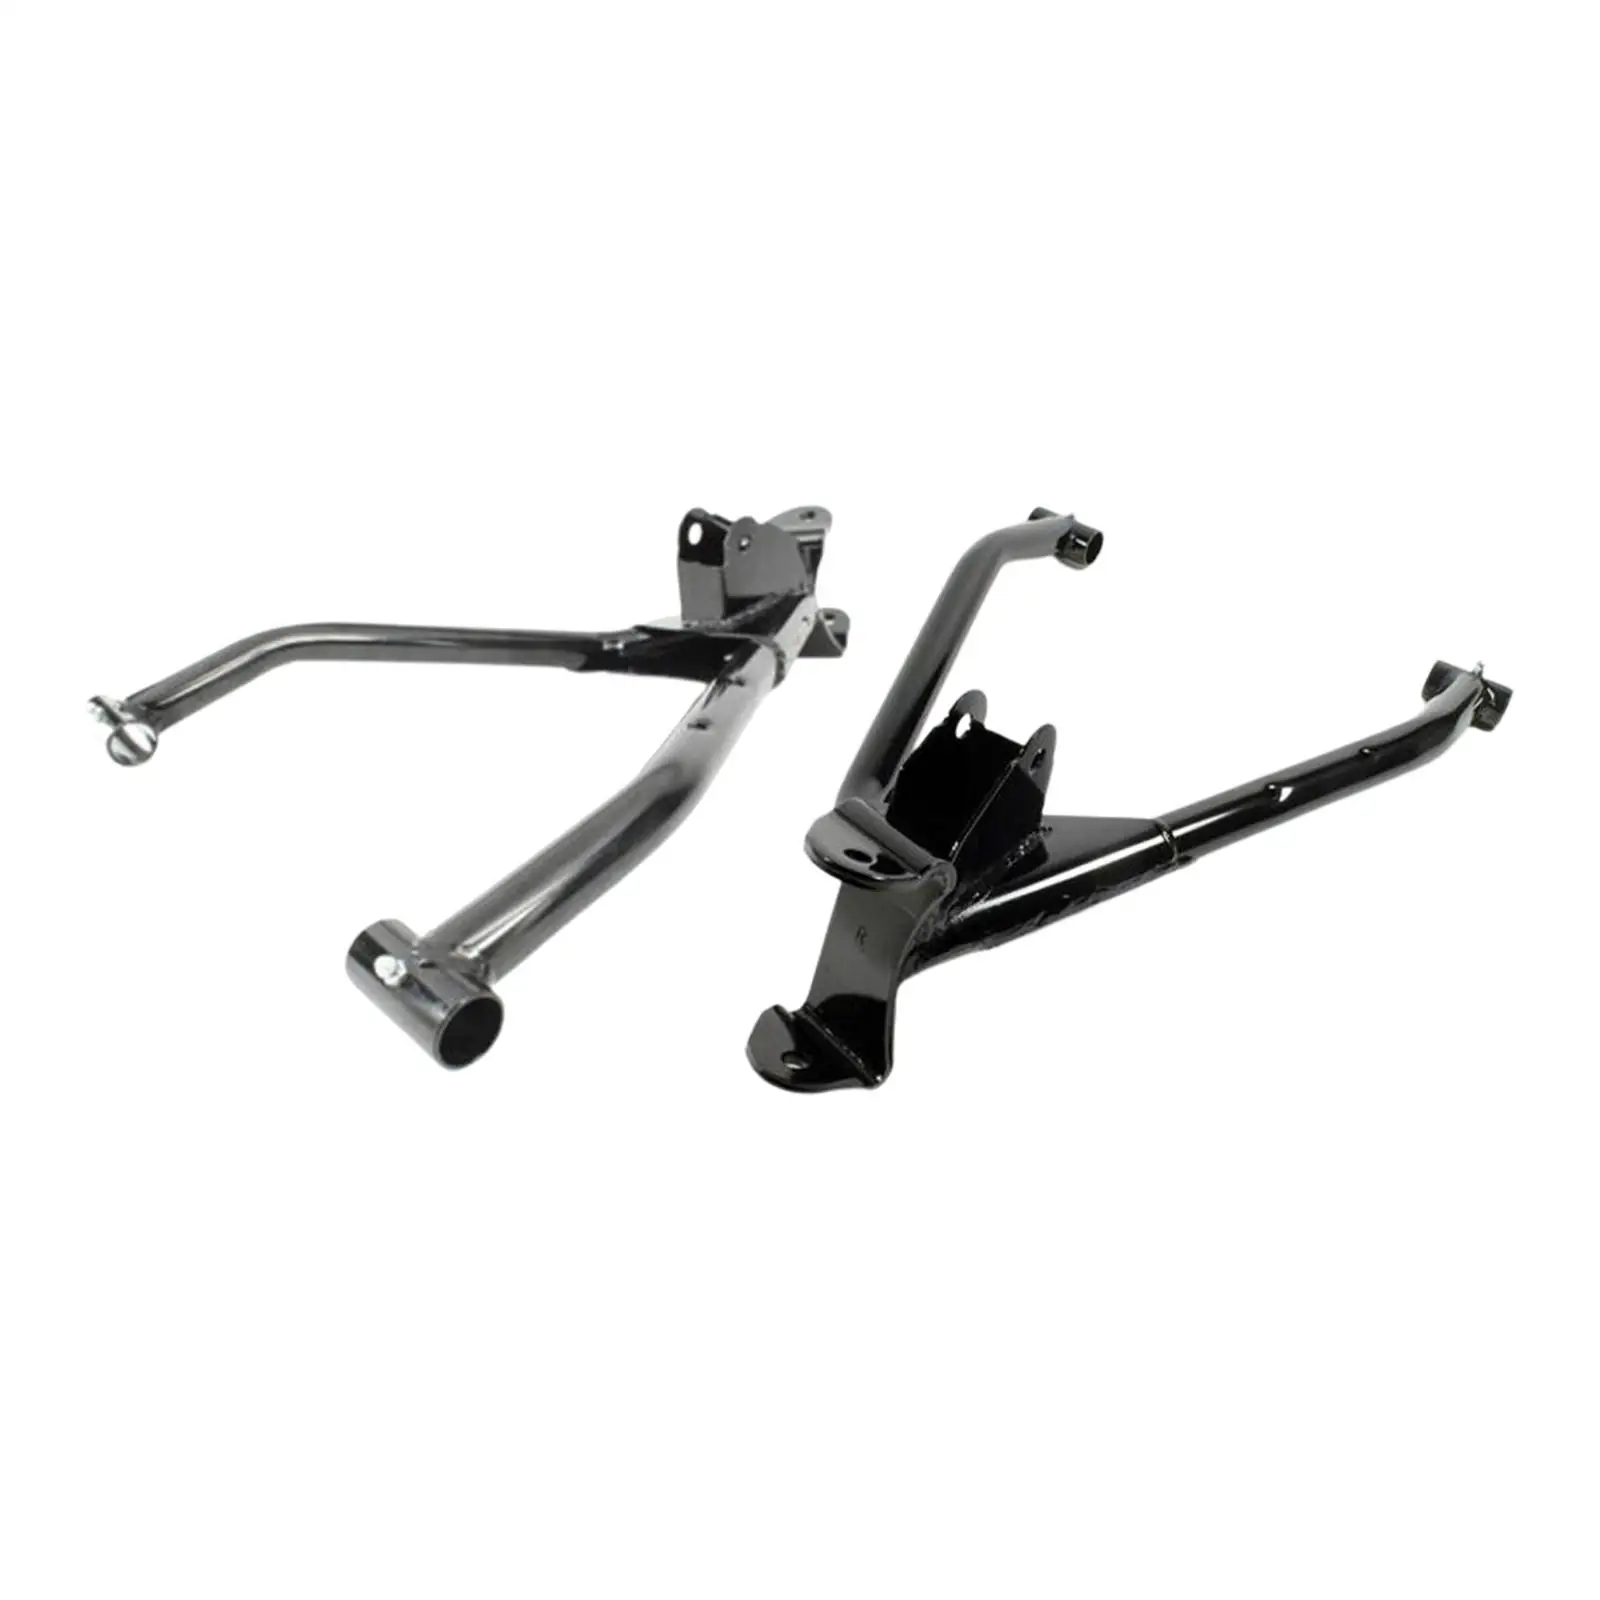 Front Control Arm replacements for RZR 170 ATV Spare Parts Black